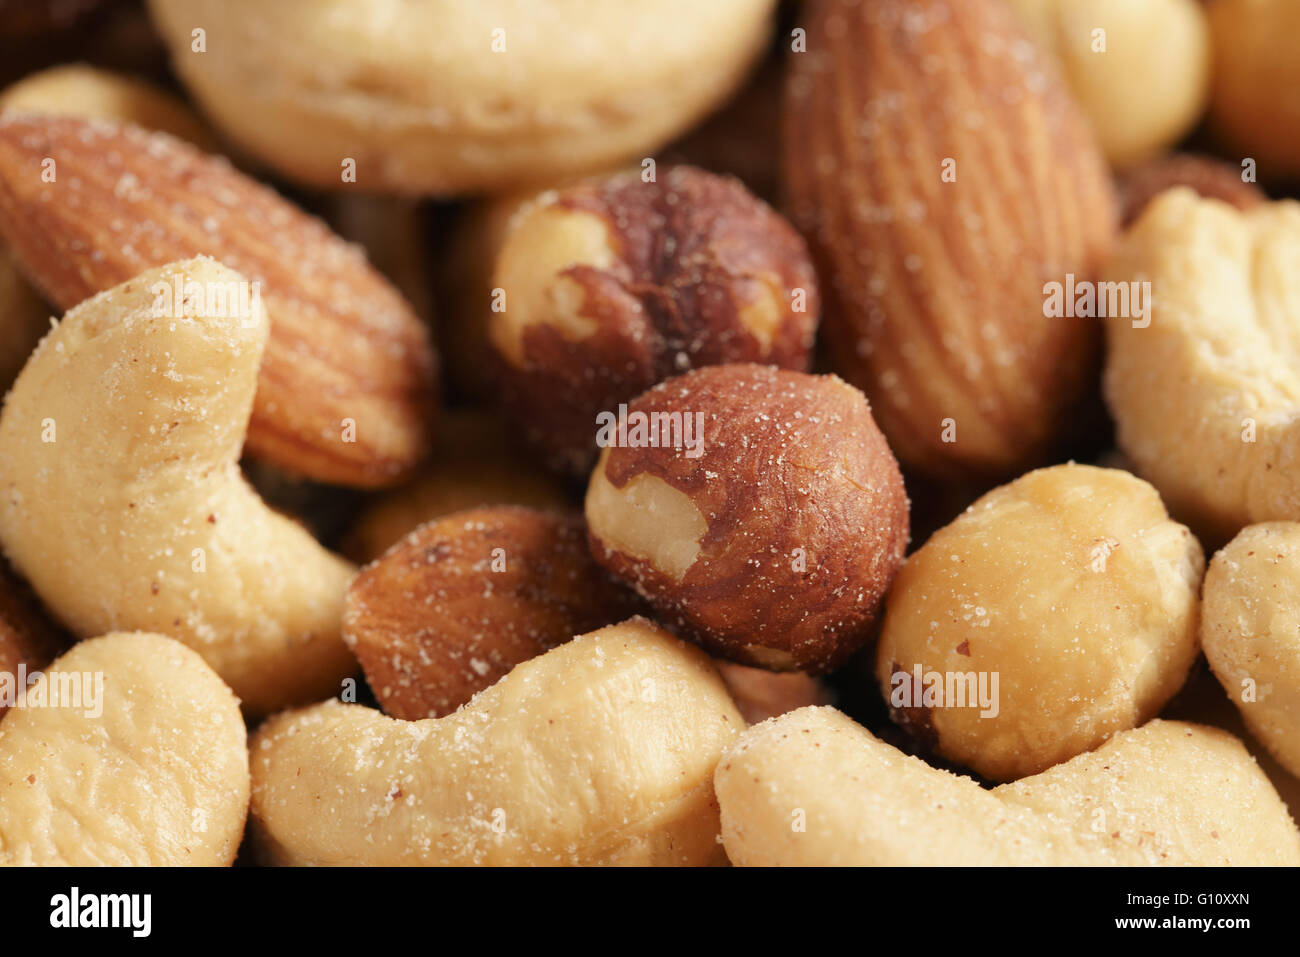 salted nut mix background Stock Photo